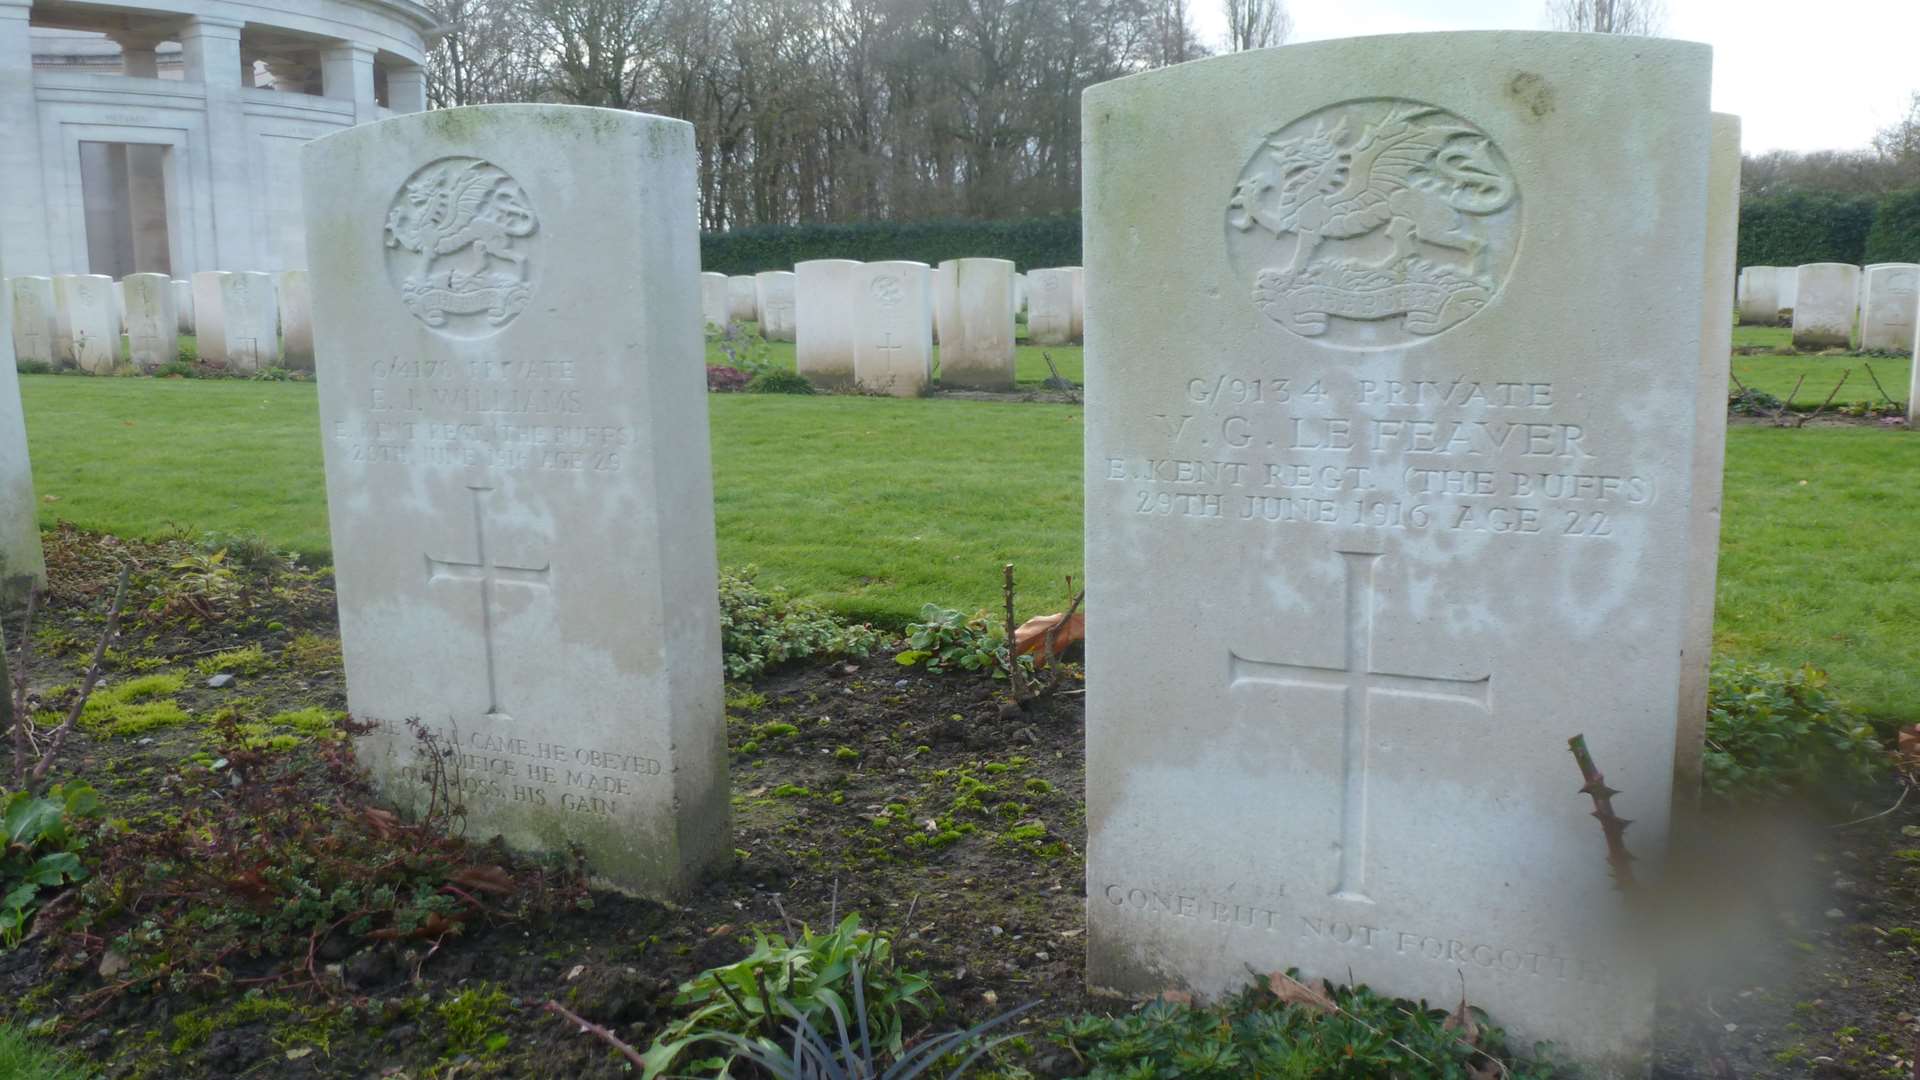 The graves of two young Buffs, Privates Edward James Williams and V.G Le Feaver killed on the same day served in the area the Truce happened